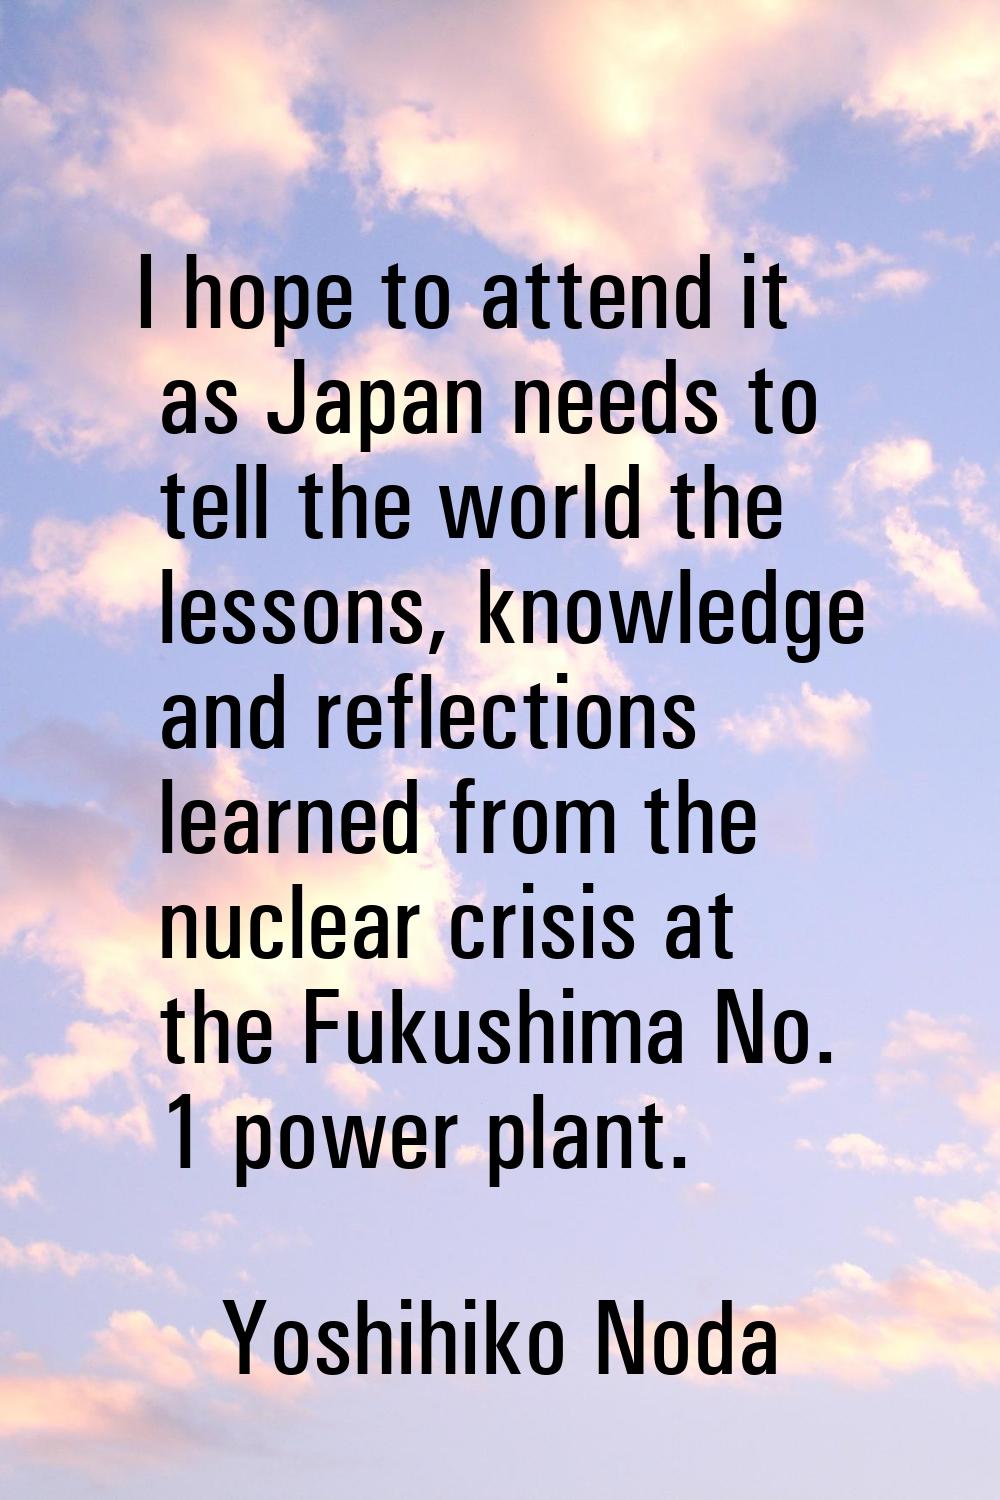 I hope to attend it as Japan needs to tell the world the lessons, knowledge and reflections learned